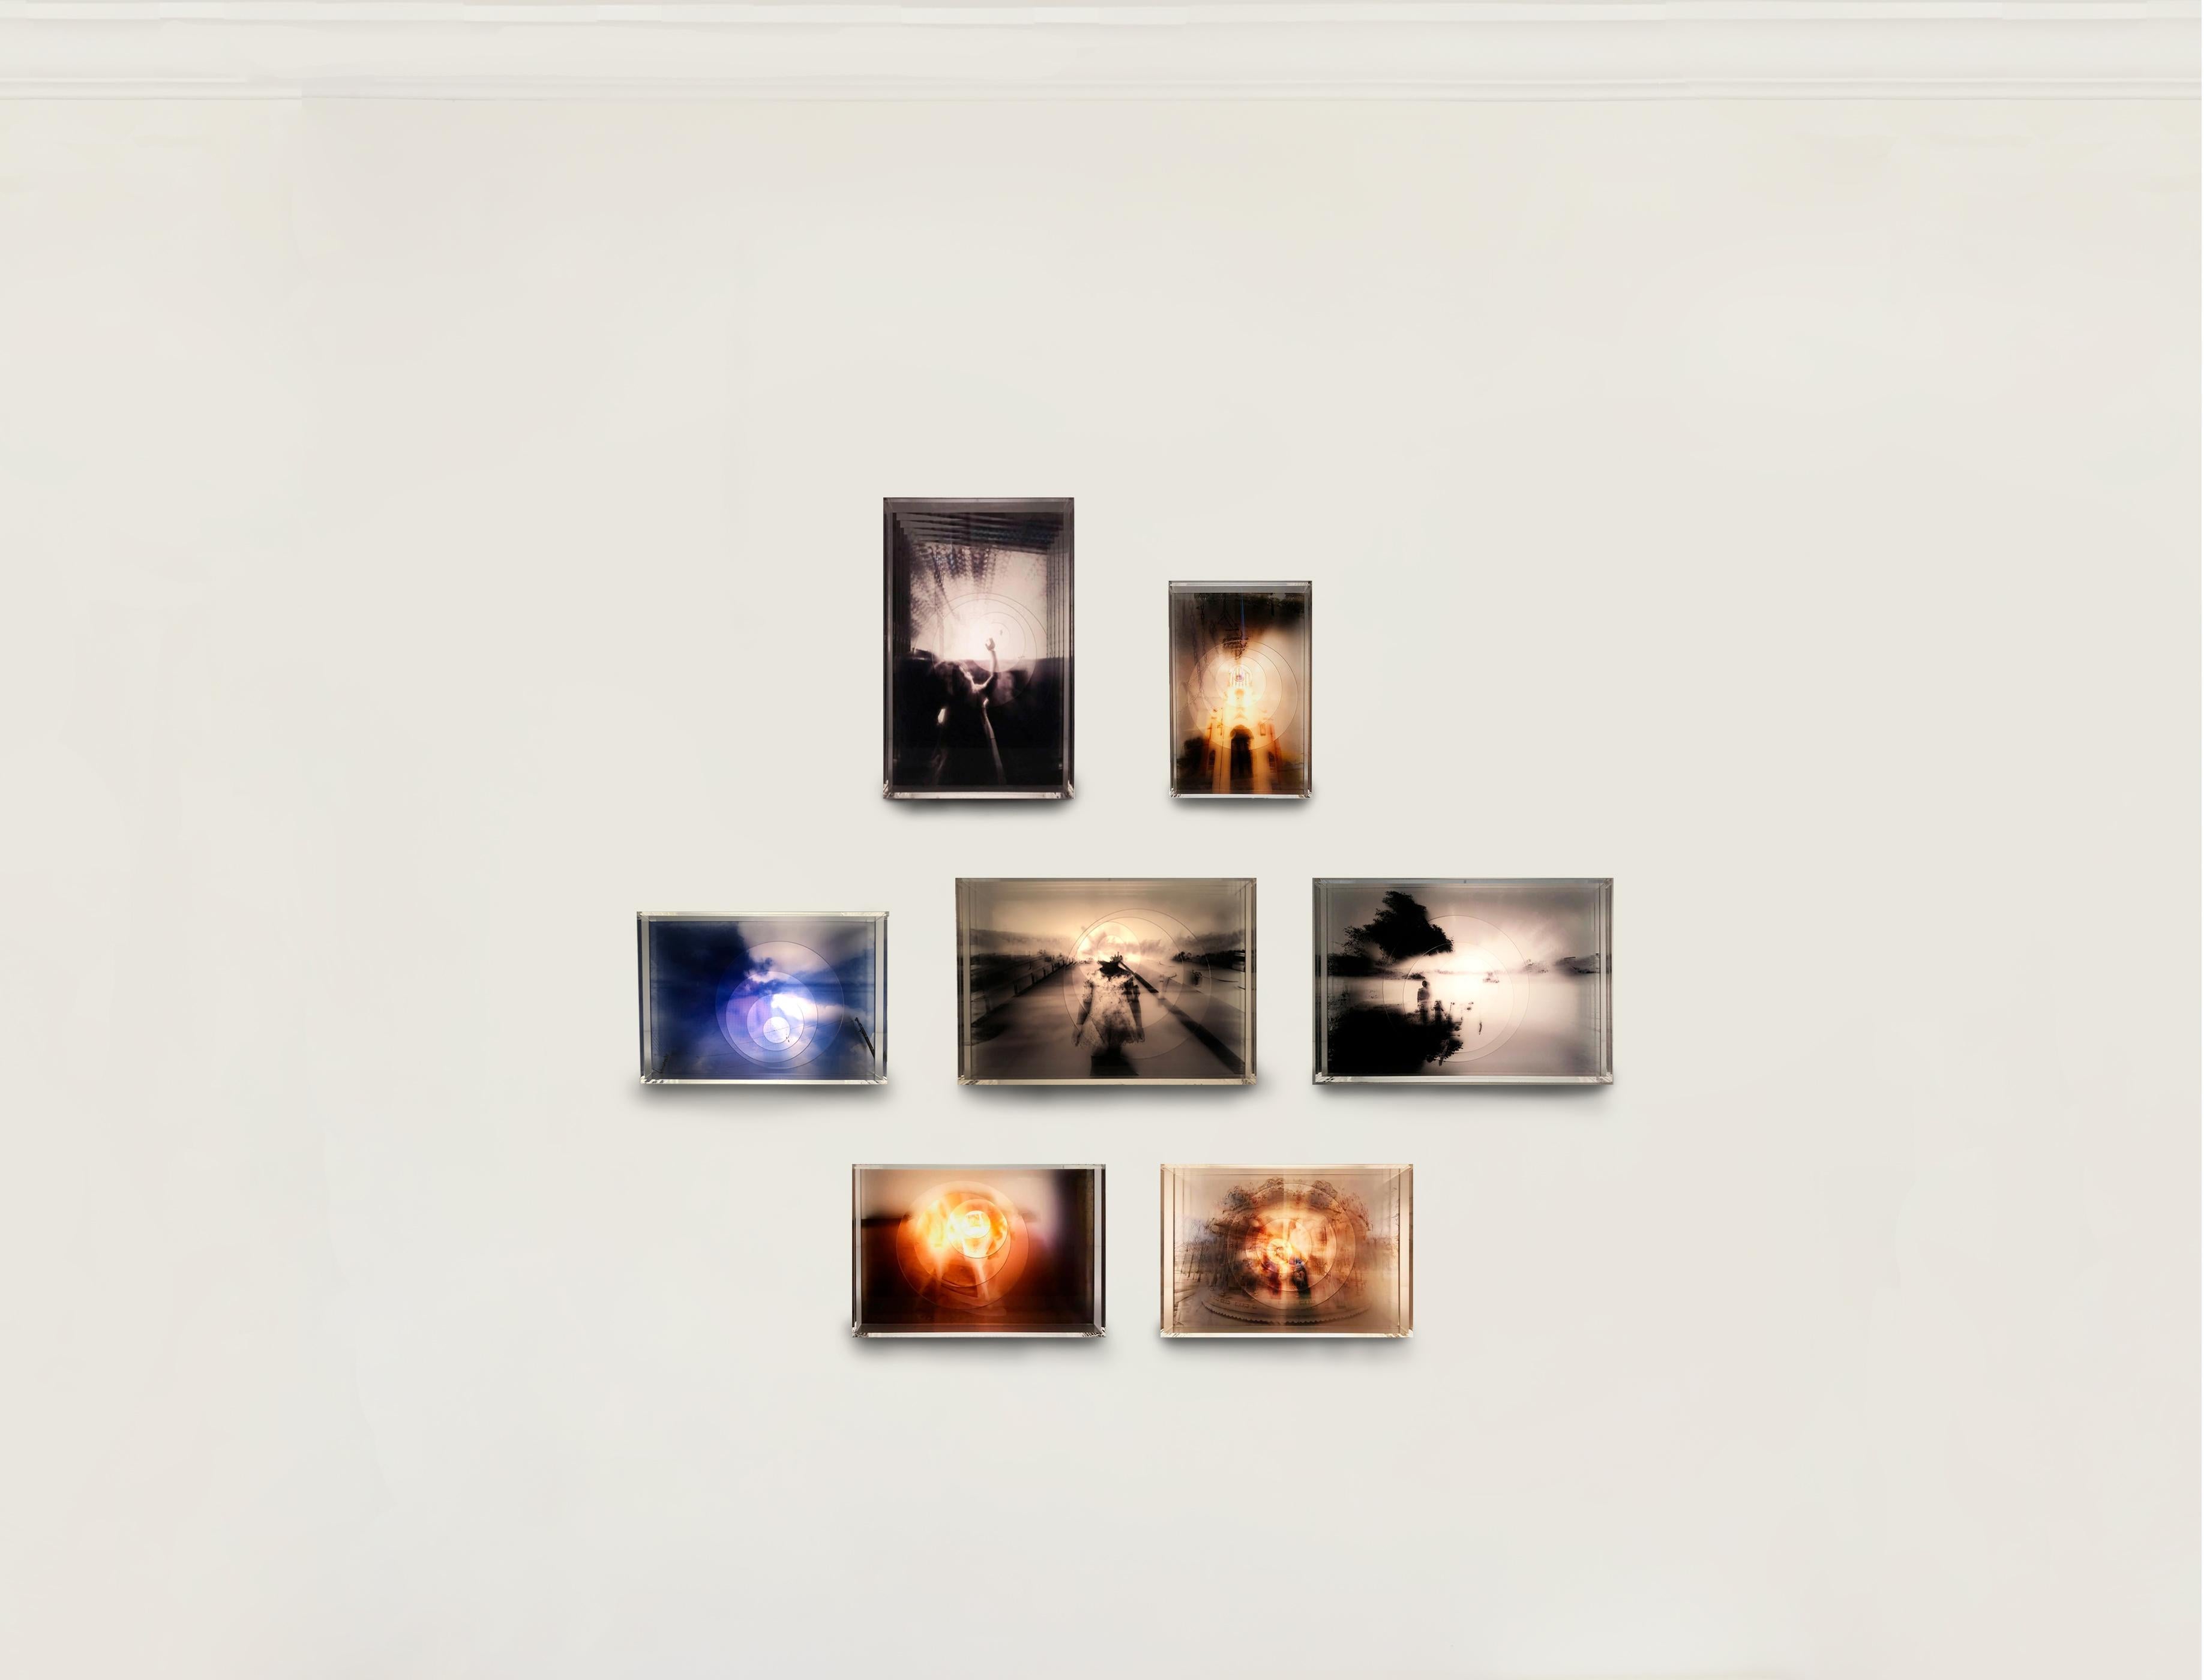 Memory Box, Series. Wall Sculpture light boxes made multiple exposure photograph